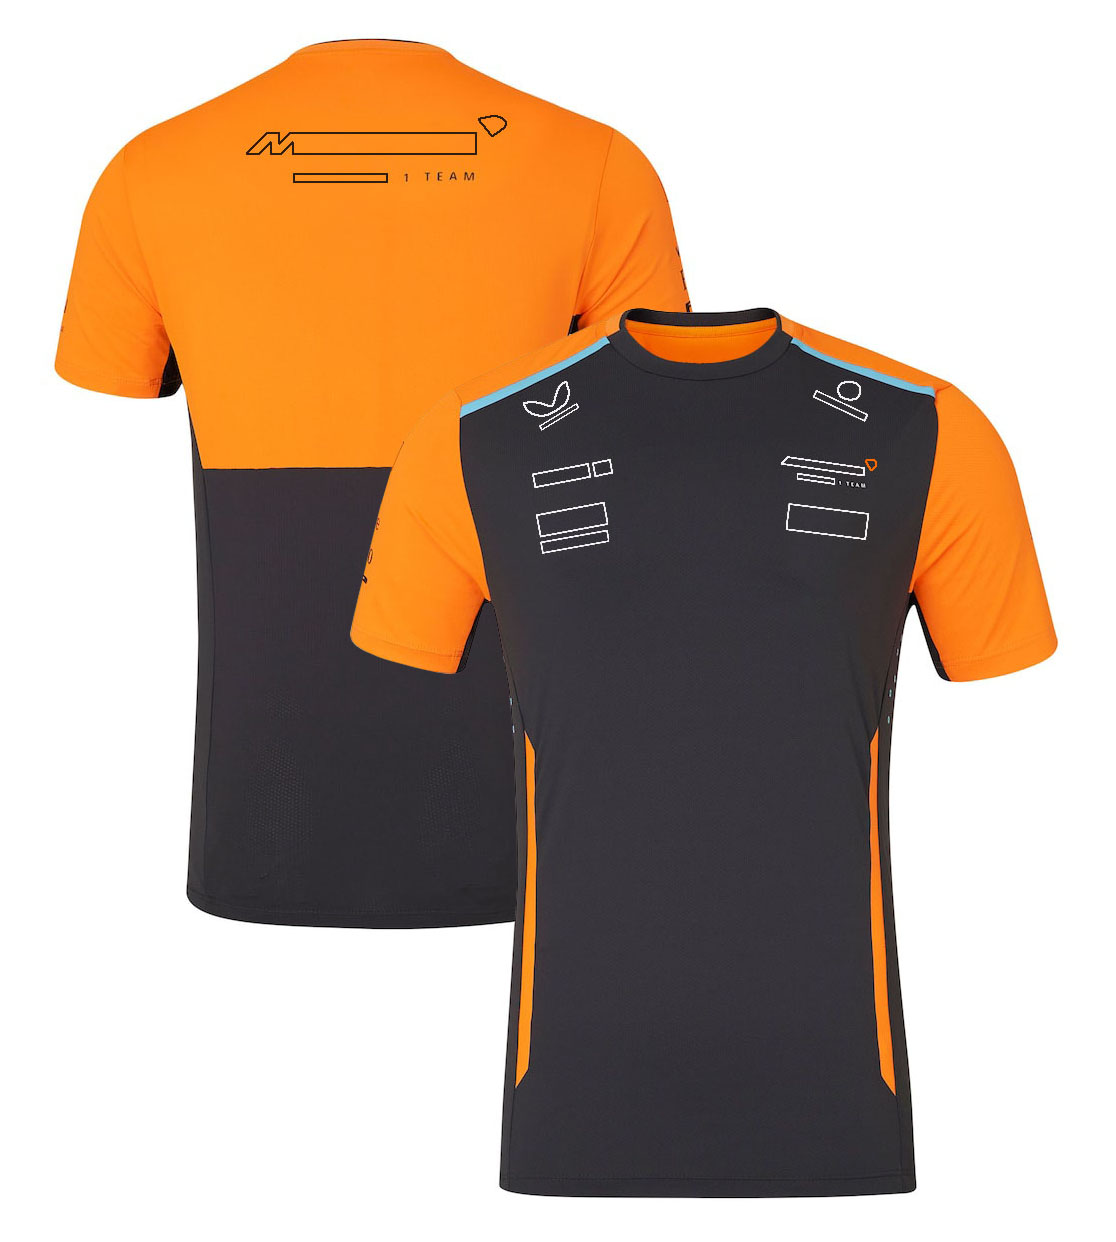 F1 Formula One short-sleeved T-shirt 2024 season racing suit round neck Tee polo shirt with lapels for fans.